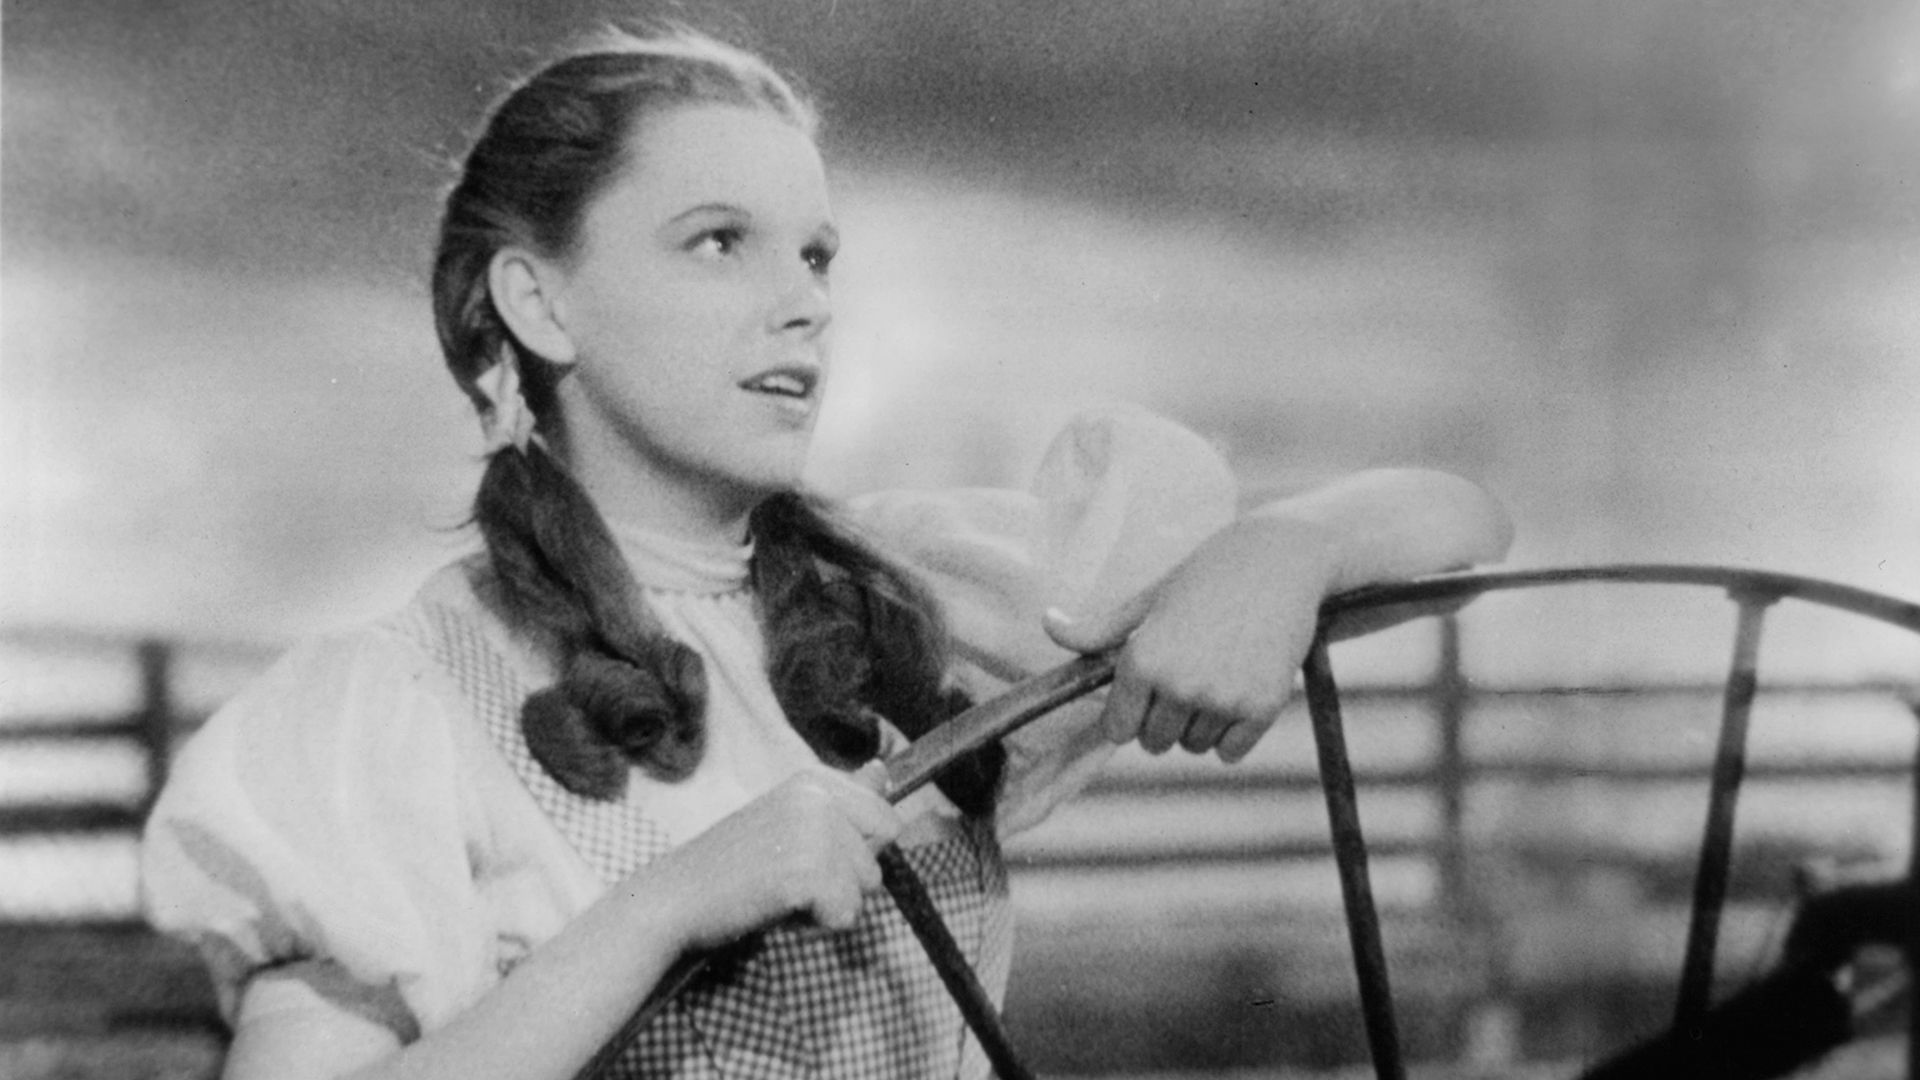 judy garland wizard of oz black and white